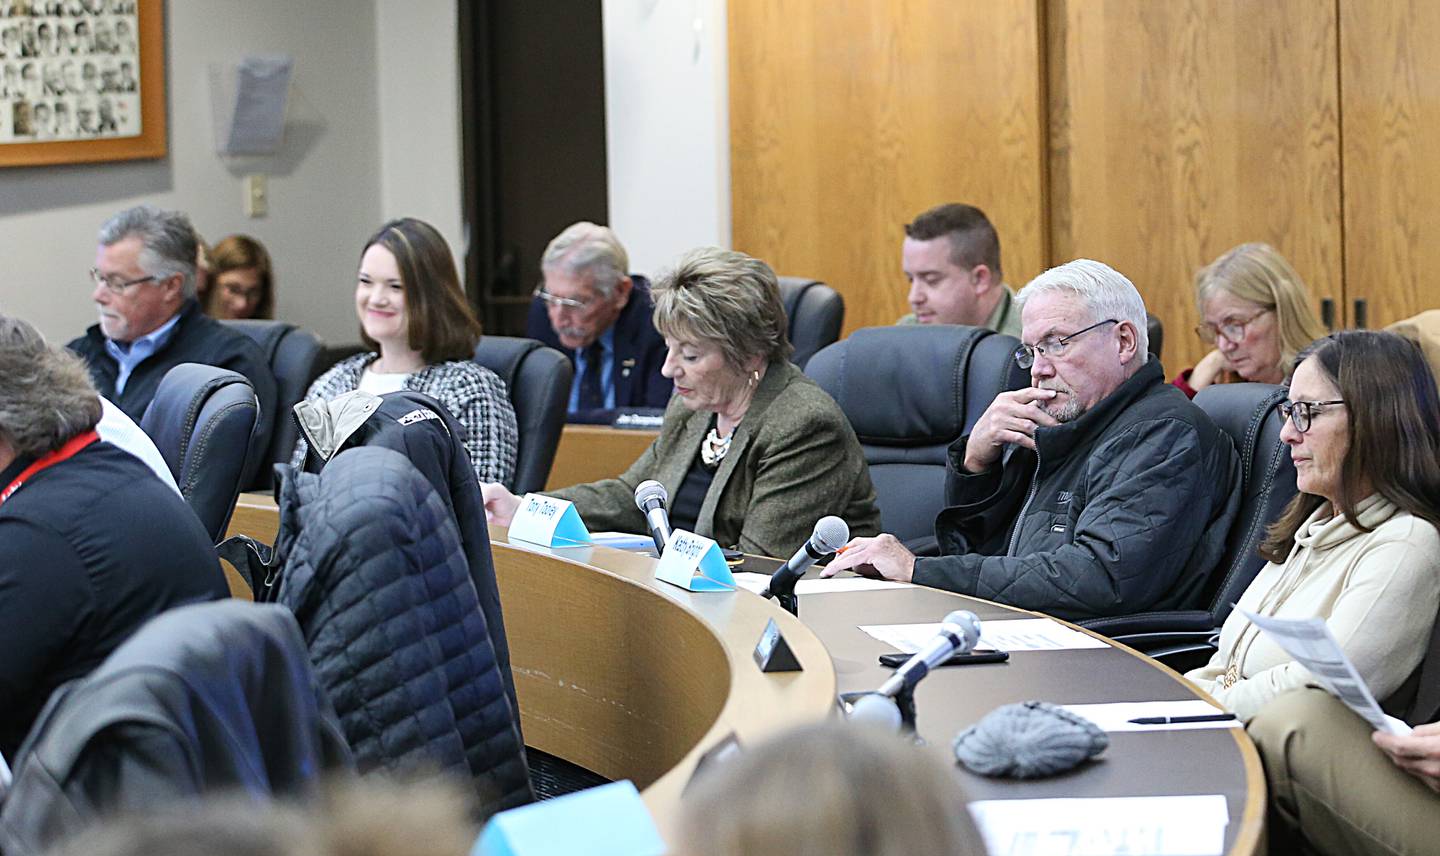 La Salle County board members (from left)  Stephen Aubry (R), Beth Findley Smith (R),  Pamela Beckett (D), Tony Tooley (R), and Kathy Bright (R), attend the County Board Meeting on Monday, Dec. 5, 2022 at the La Salle County Government Complex in Ottawa.